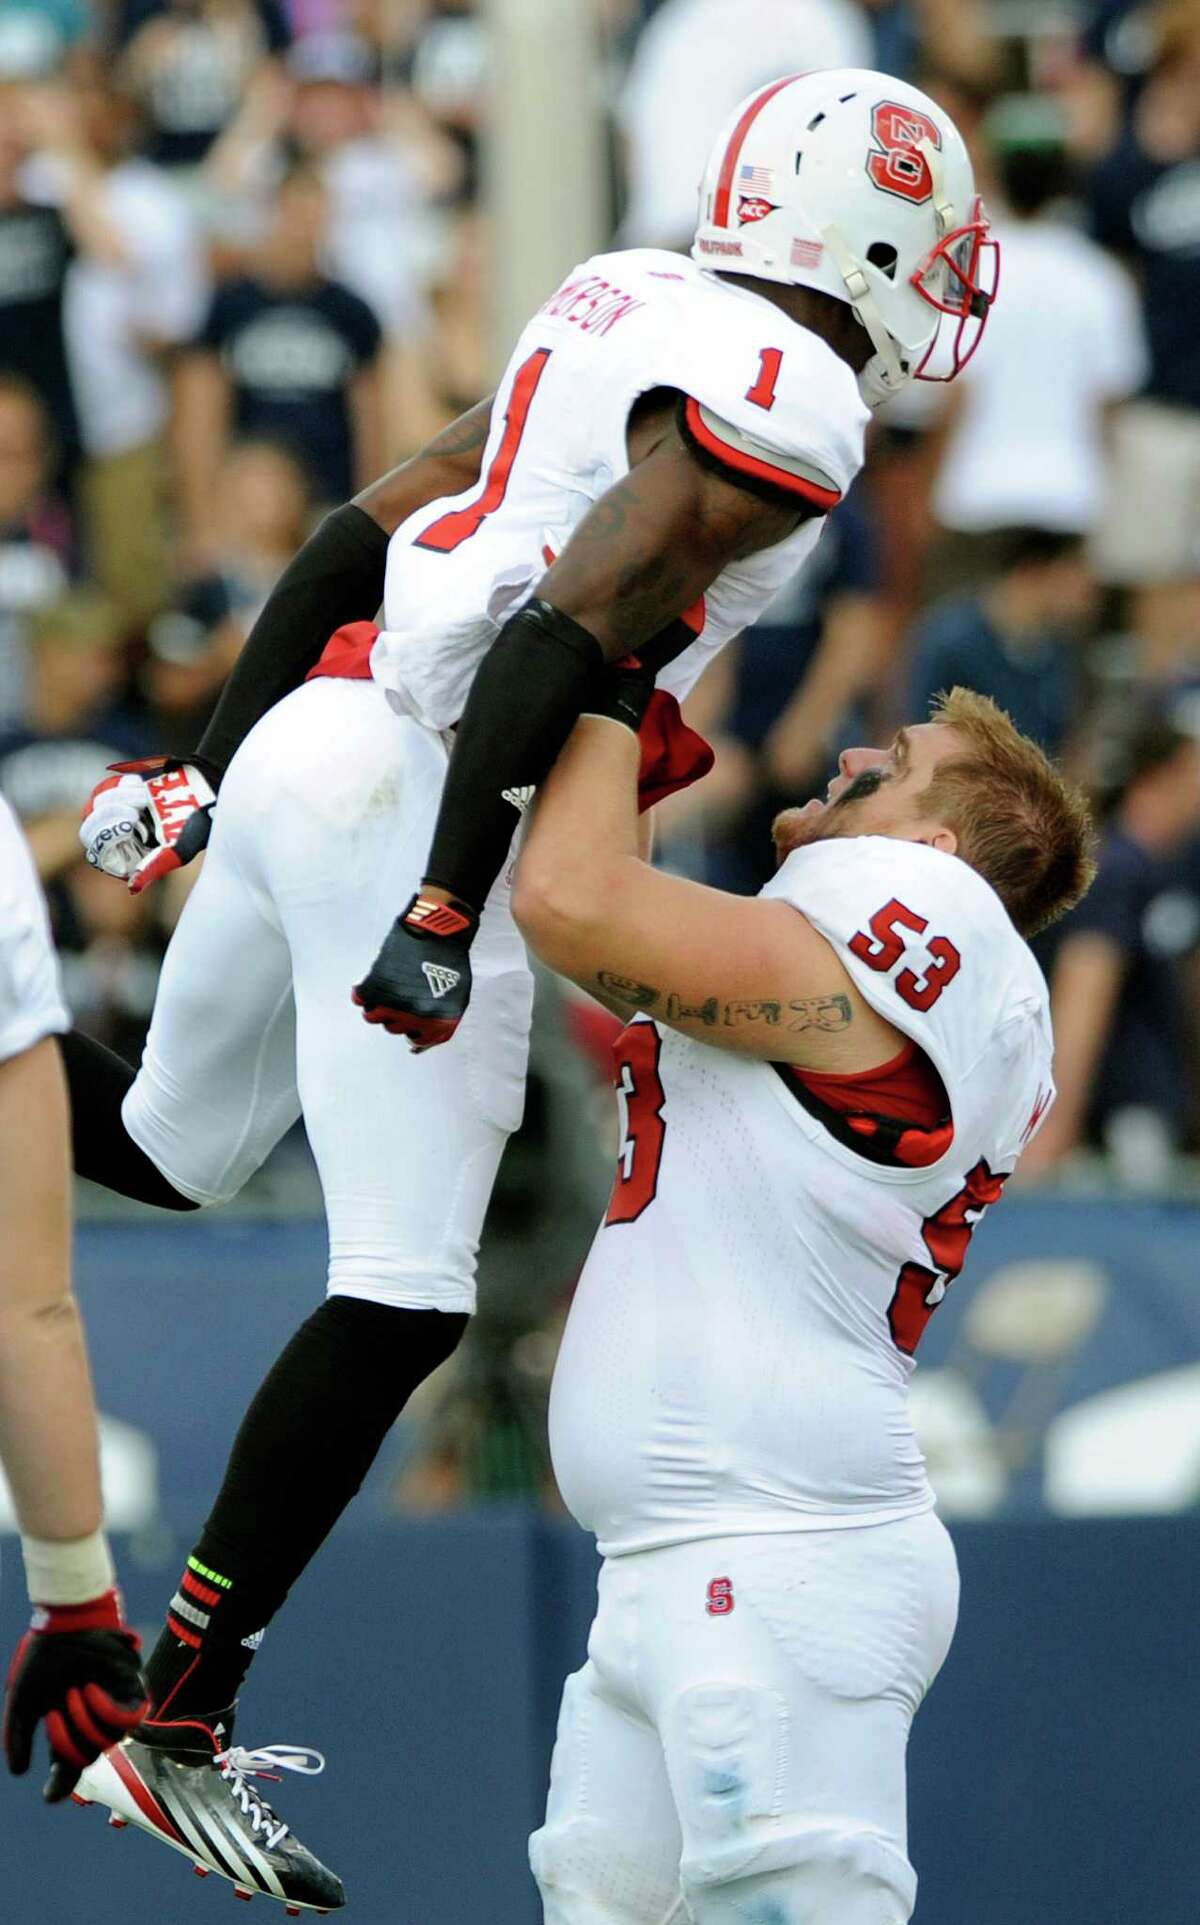 North Carolina State's David Amerson, left and Camden Wentz celebrate late in the second half of North Carolina's 10-7 victory over Connecticut in their NCAA college football game in East Hartford, Conn., on Saturday, Sept. 8, 2012. (AP Photo/Fred Beckham)